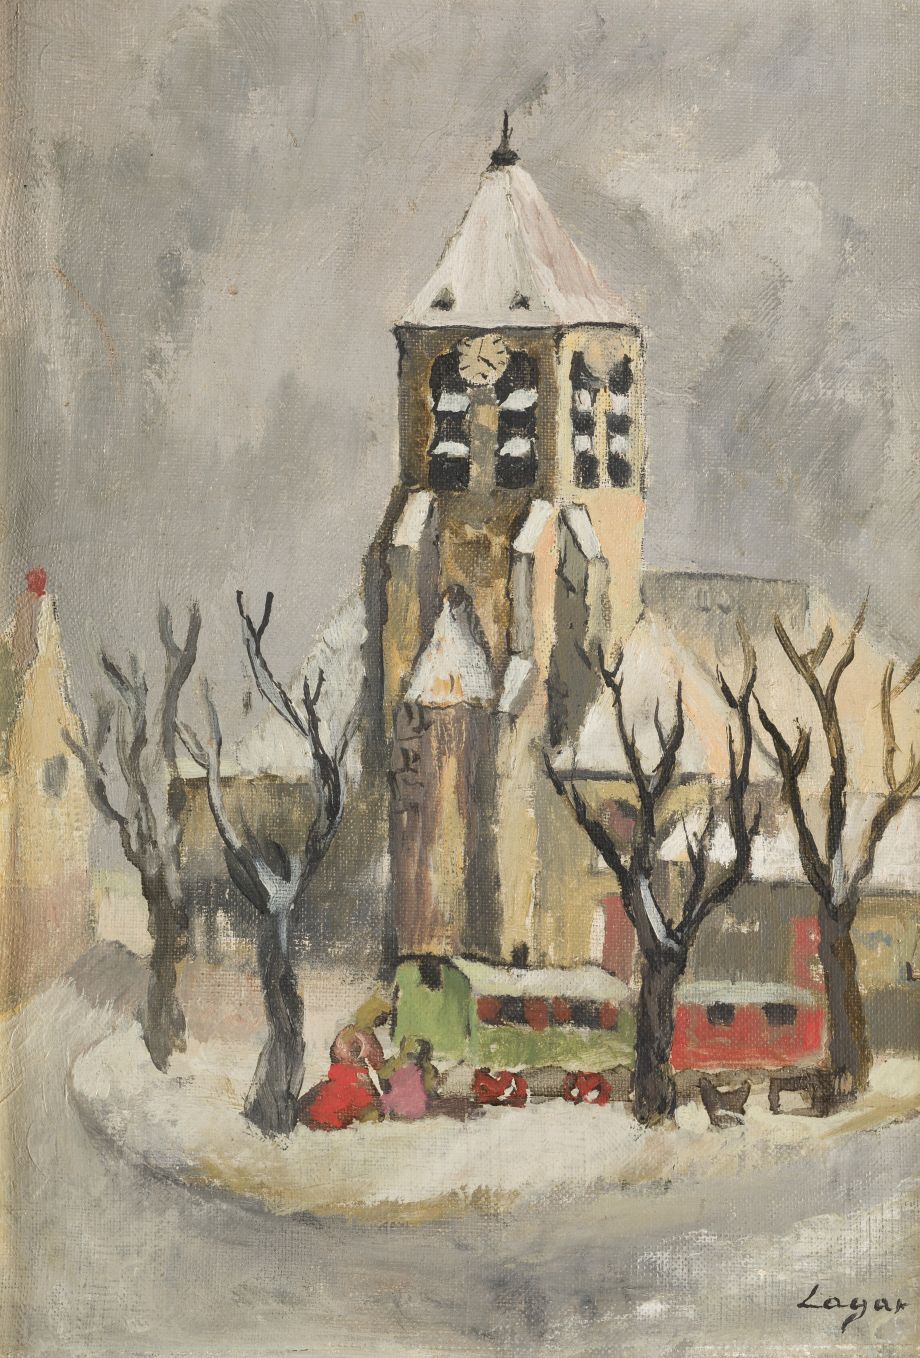 CELSO LAGAR (1891 / 1966) "Rouloutes in front of the church" Signiert in der unt&hellip;